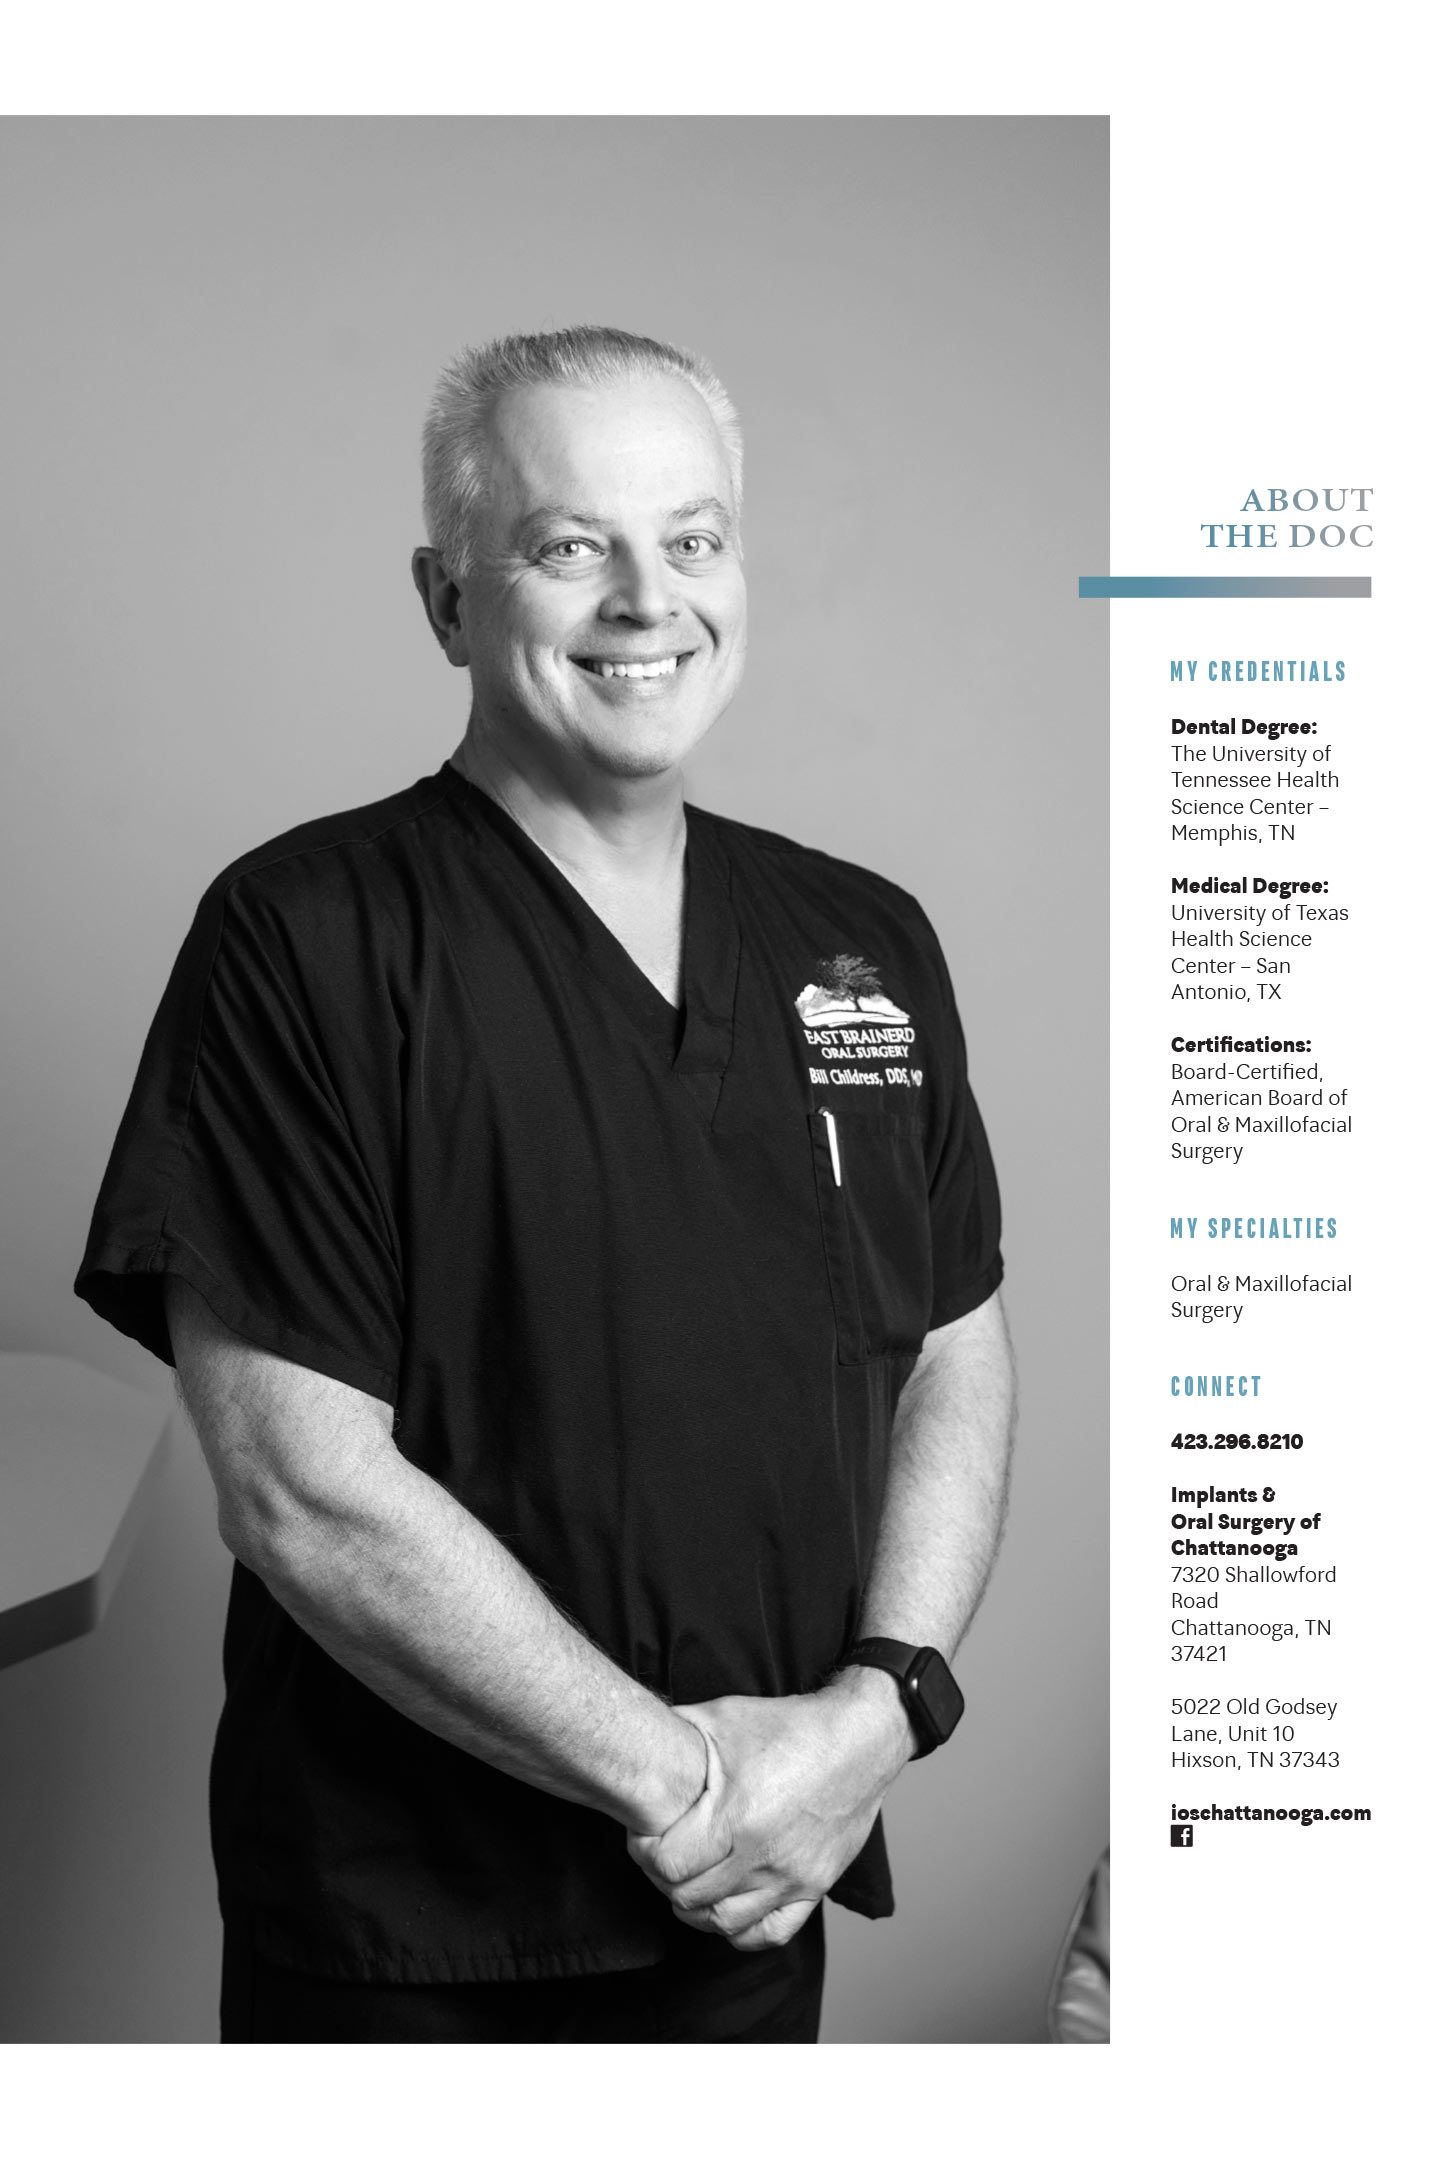 About Dr. Bill Childress at Implants and Oral Surgery of Chattanooga